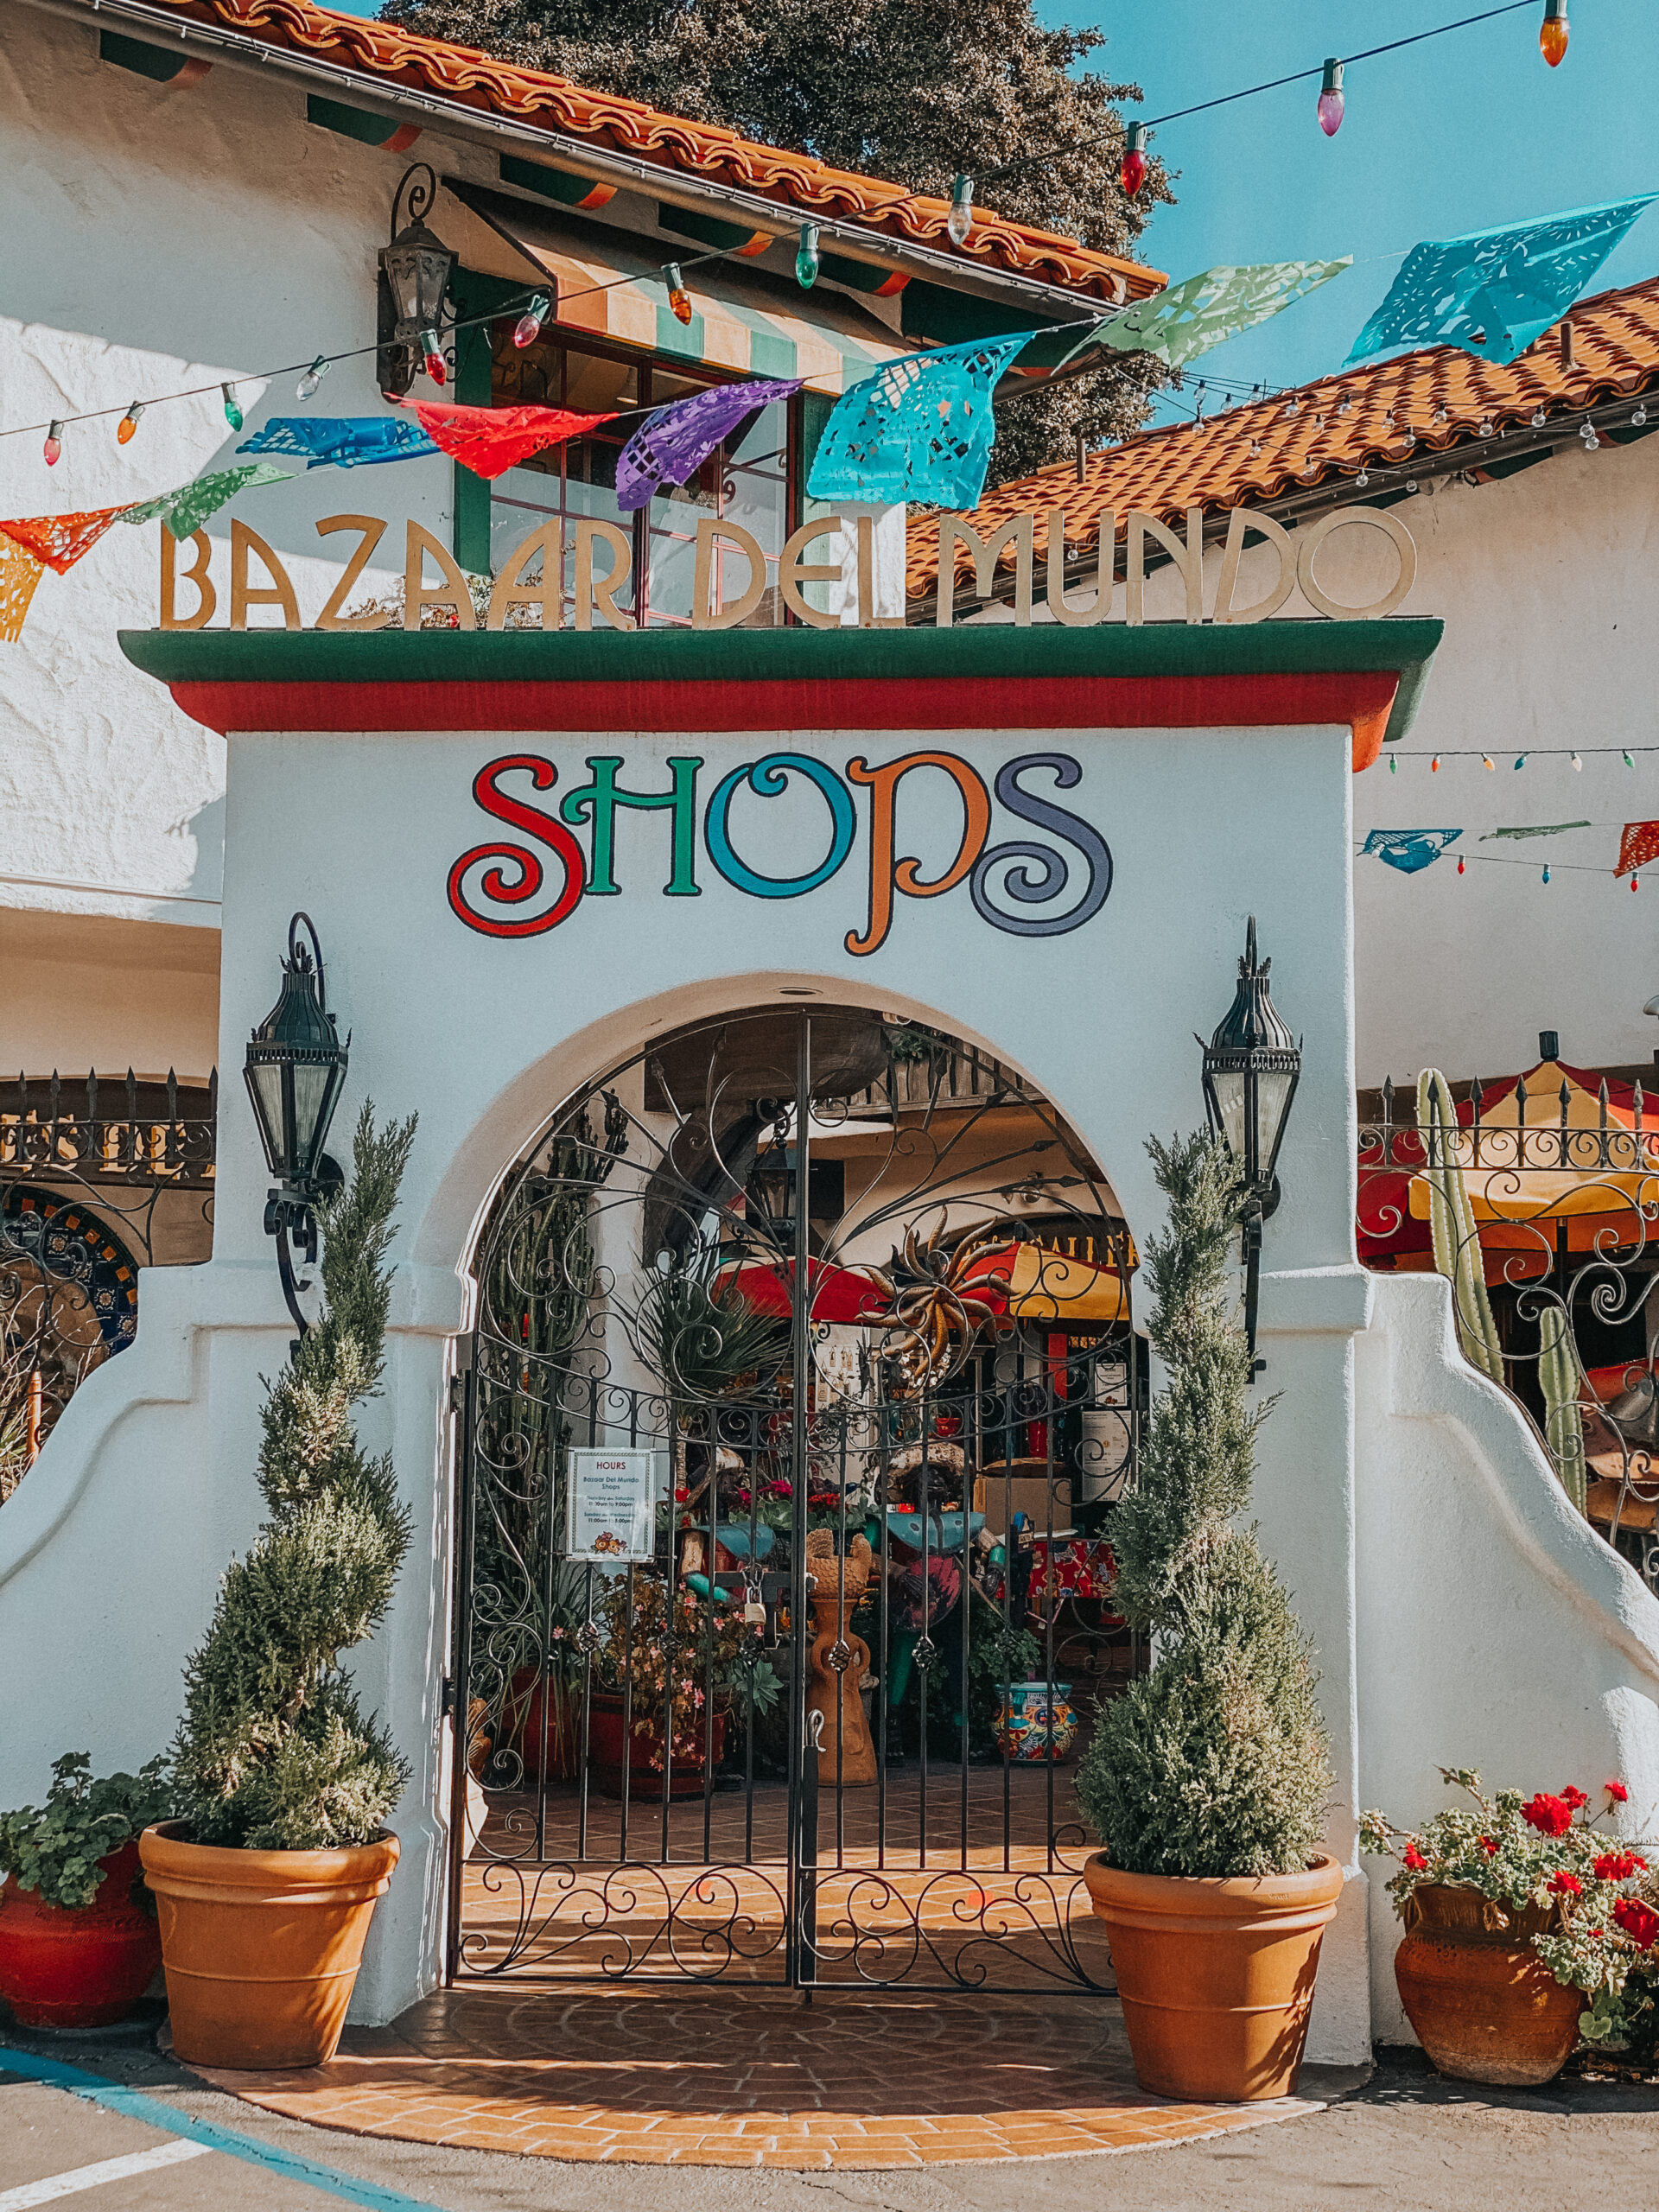 Things to do in Old Town San Diego Bazaar del Mundo